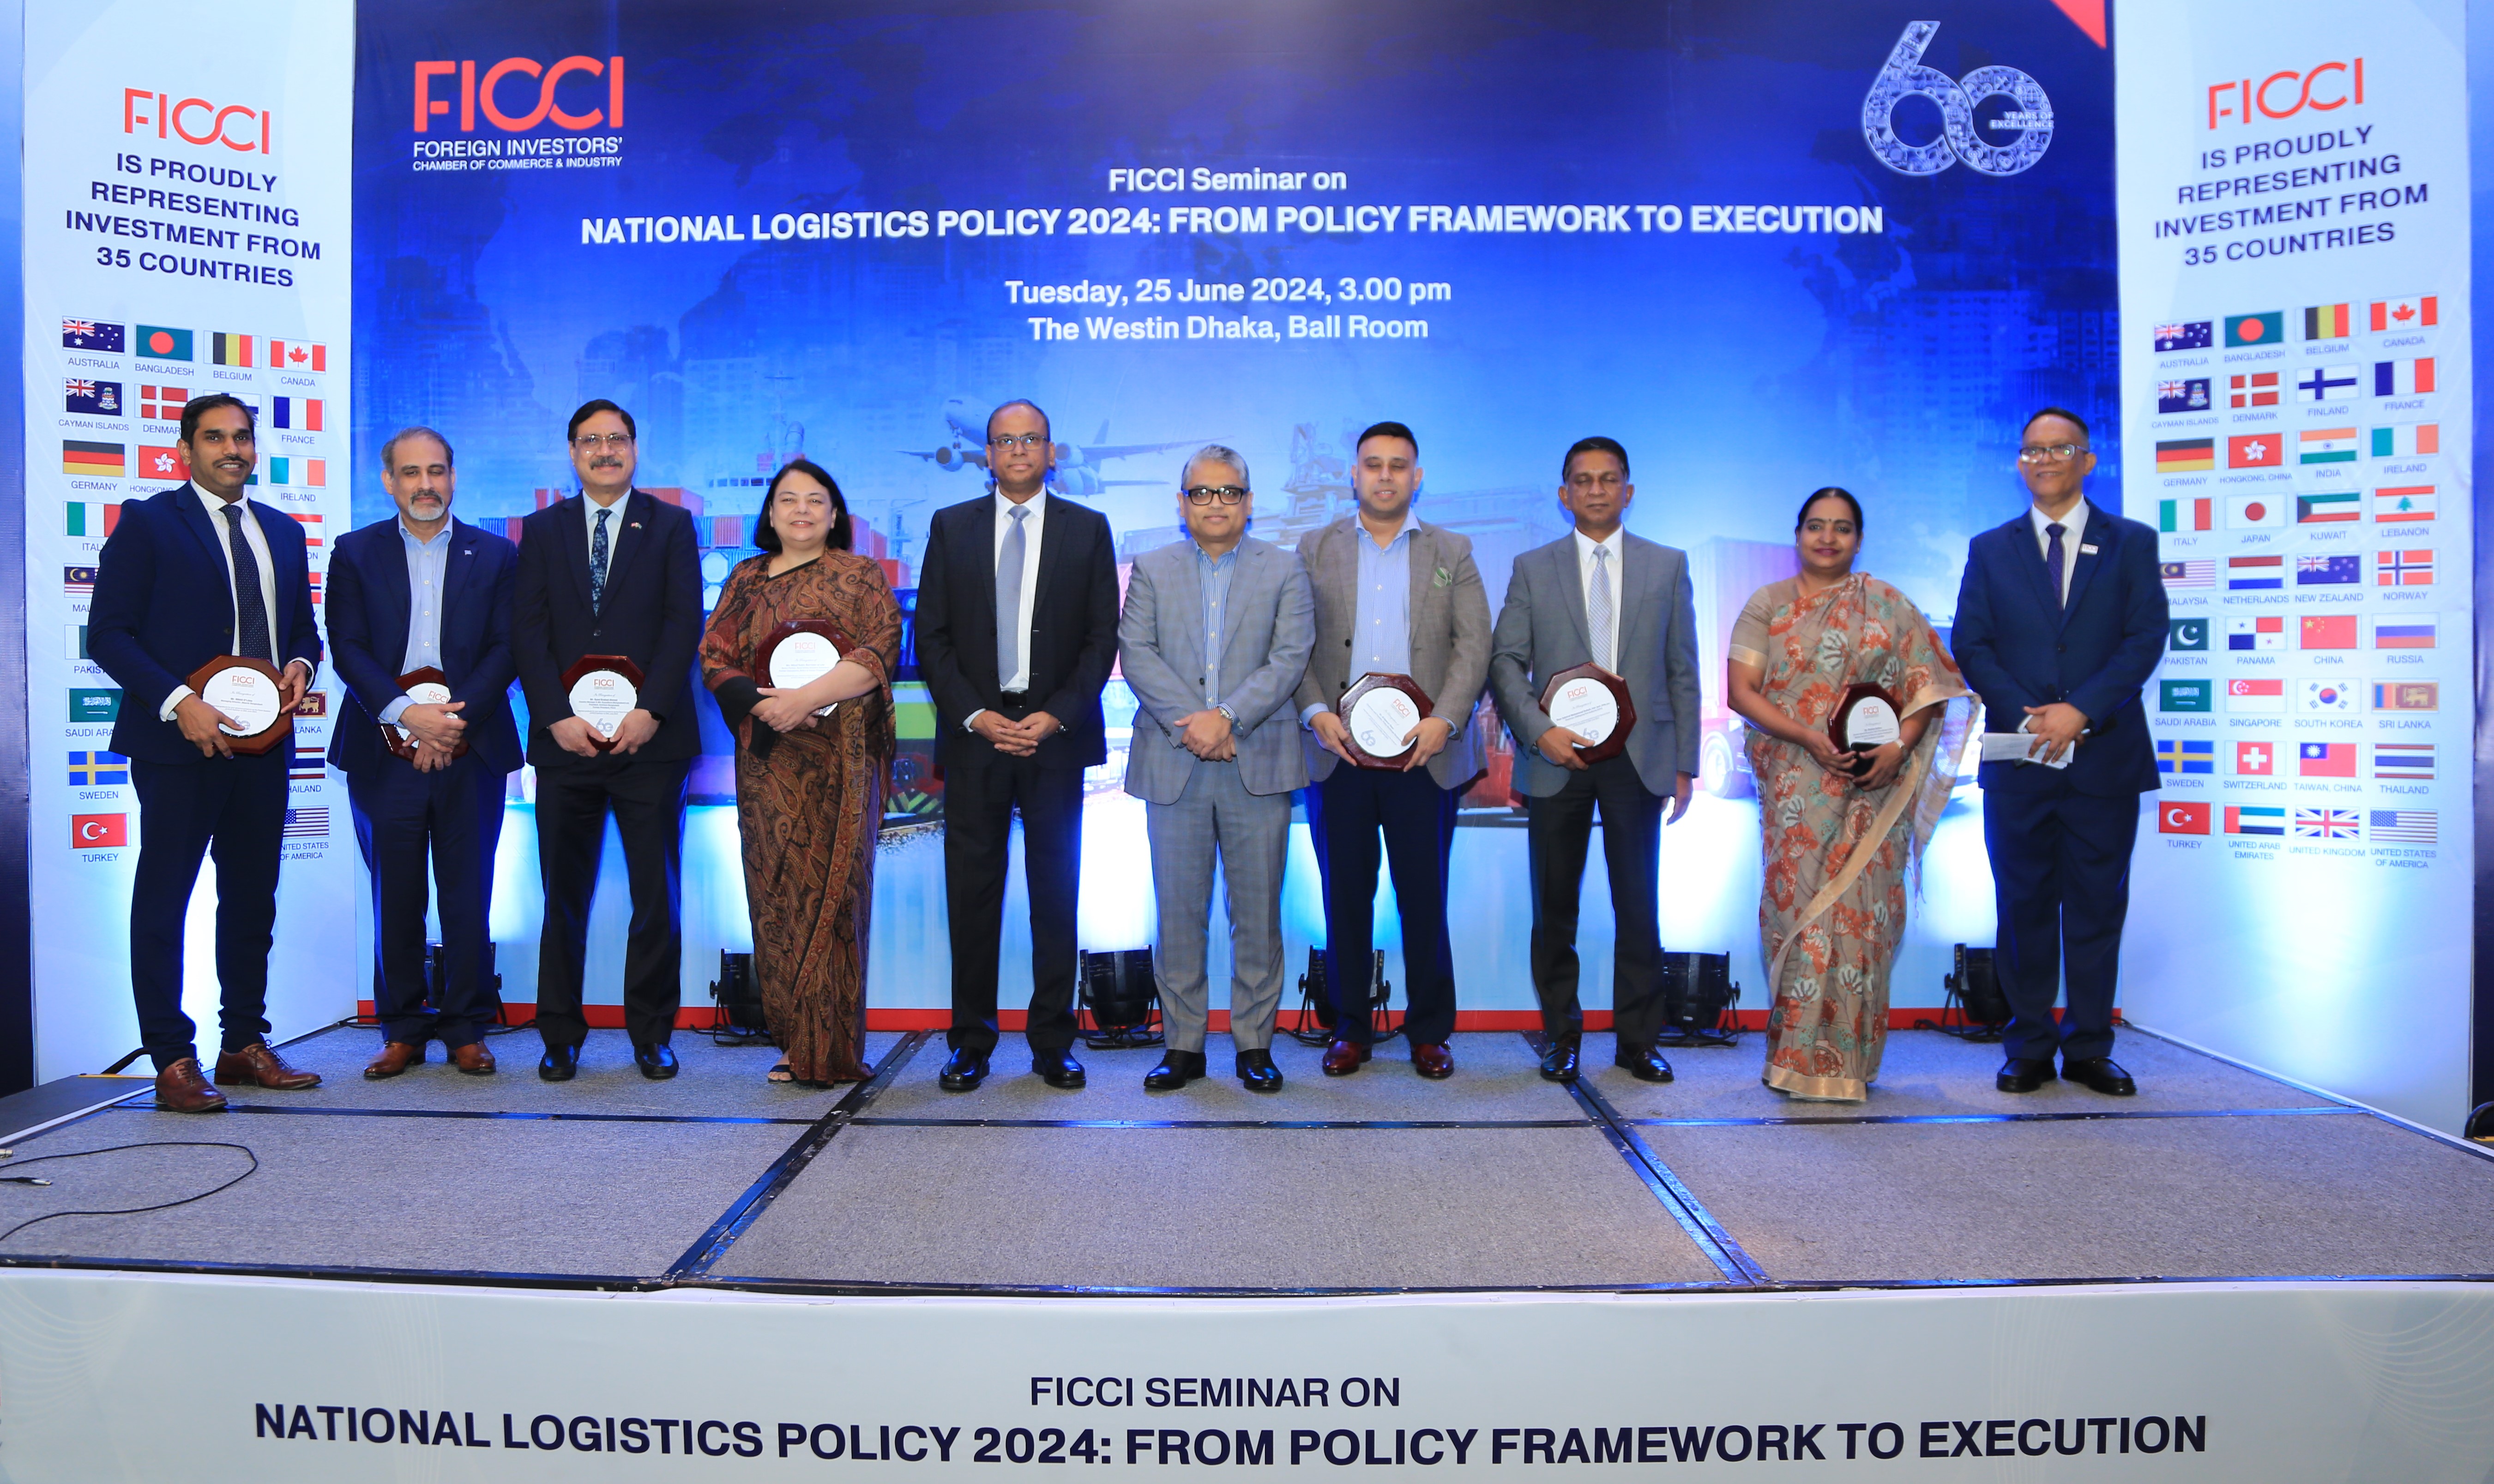 National logistics policy will be a 'game changer' to build a Smart Bangladesh: Mohammad Tofazzel Hossain Miah